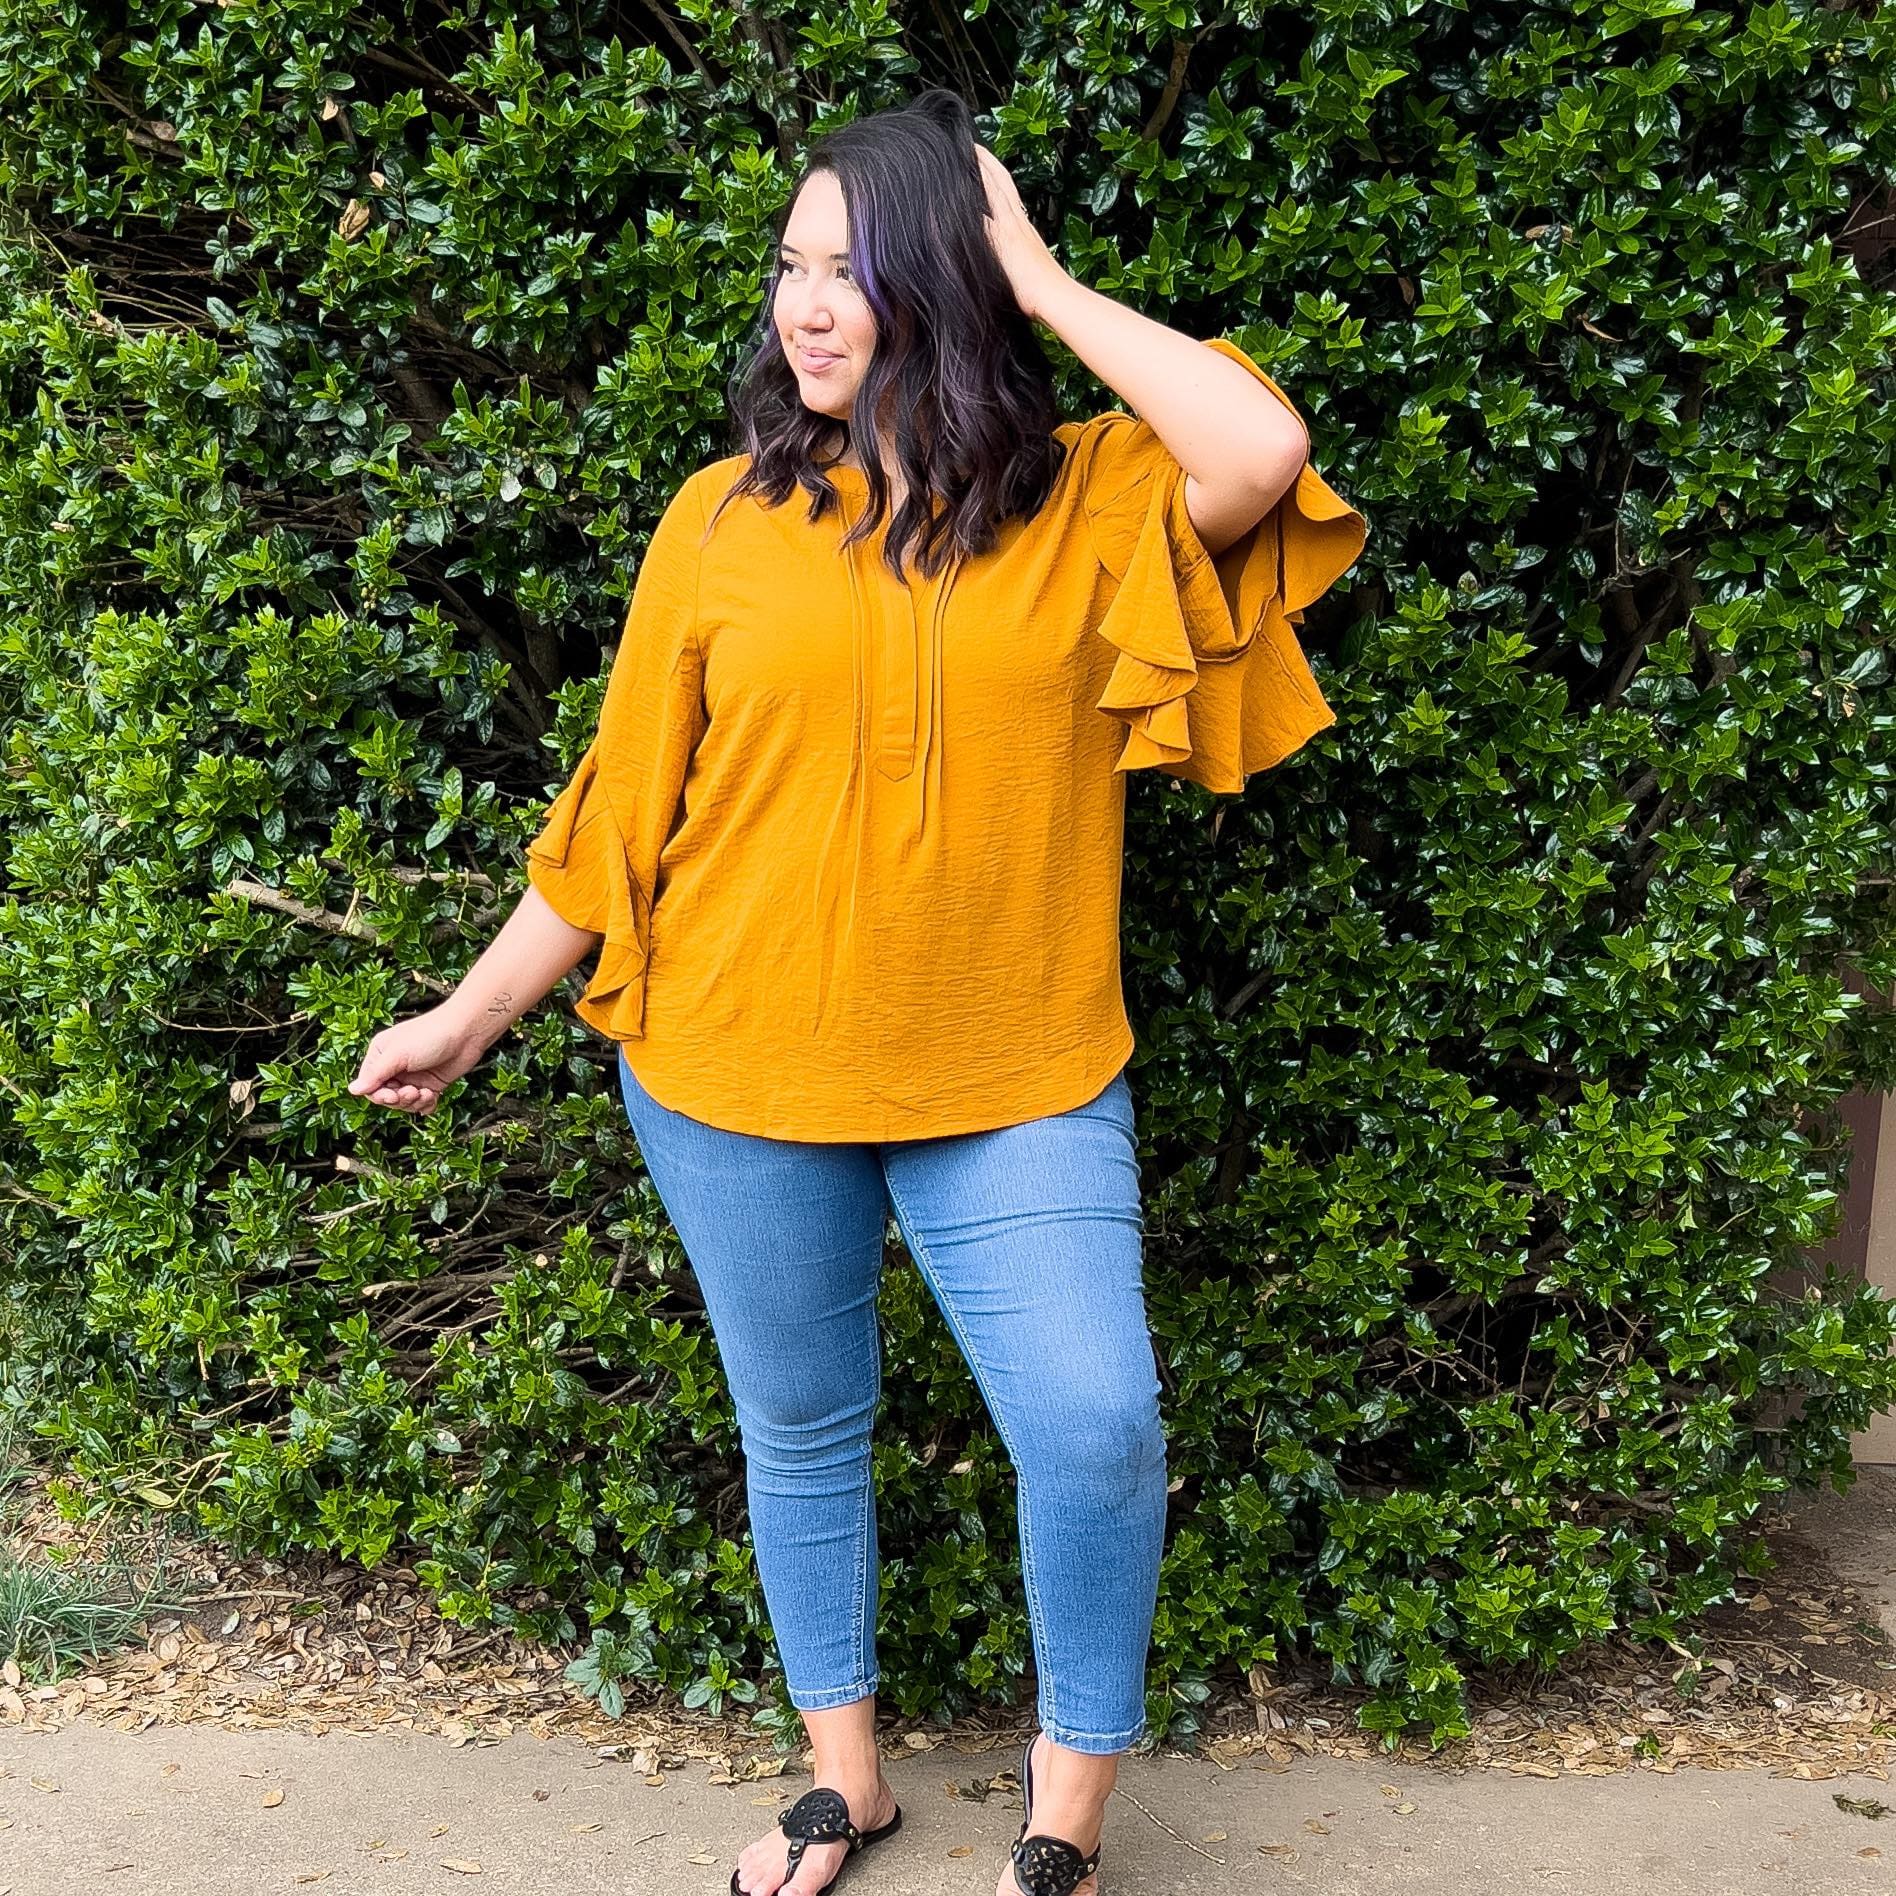 Envy Stylz Boutique Women - Apparel - Shirts - T-Shirts Mustard Bell Sleeve Top